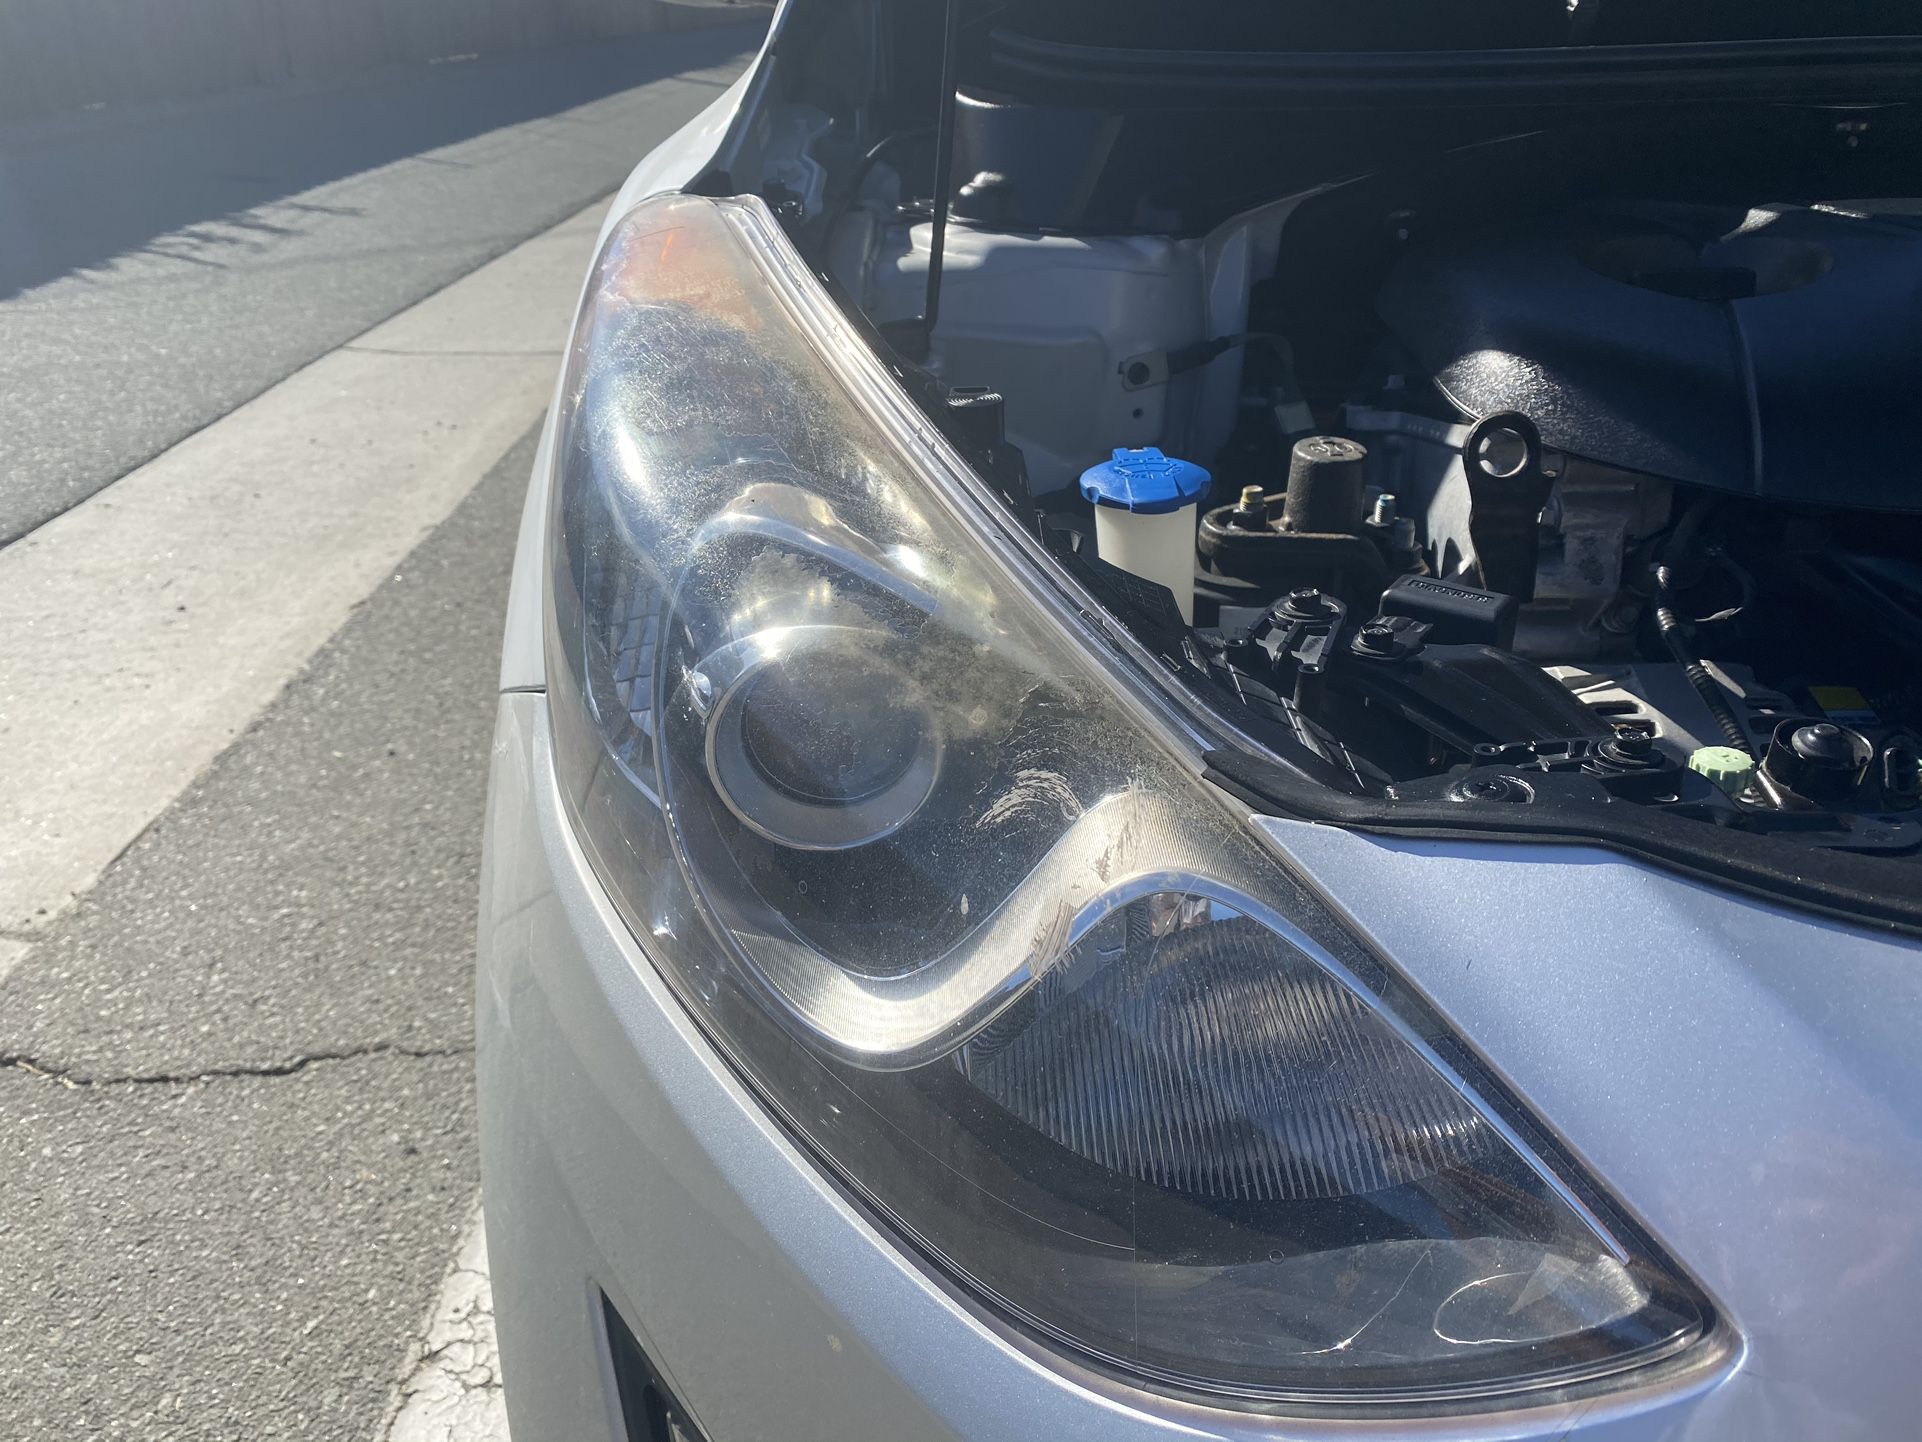 Meguiar's ultimate compound worked really well on my headlights, as for  sealing what do you guys recommend? Just a wax? : r/Detailing